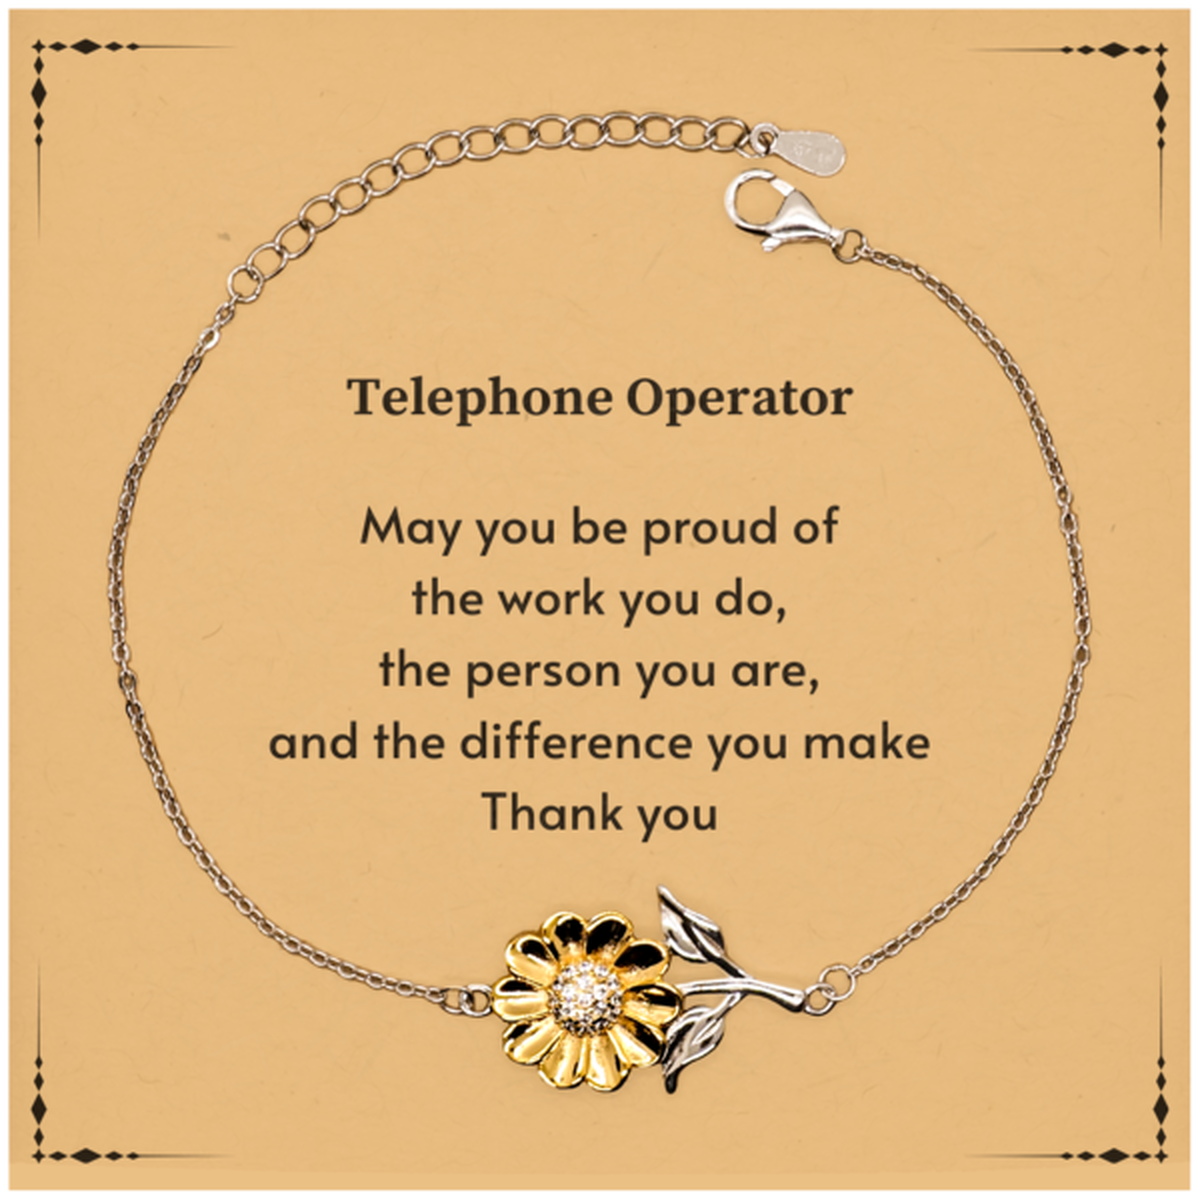 Heartwarming Sunflower Bracelet Retirement Coworkers Gifts for Telephone Operator, Telephone Operator May You be proud of the work you do, the person you are Gifts for Boss Men Women Friends